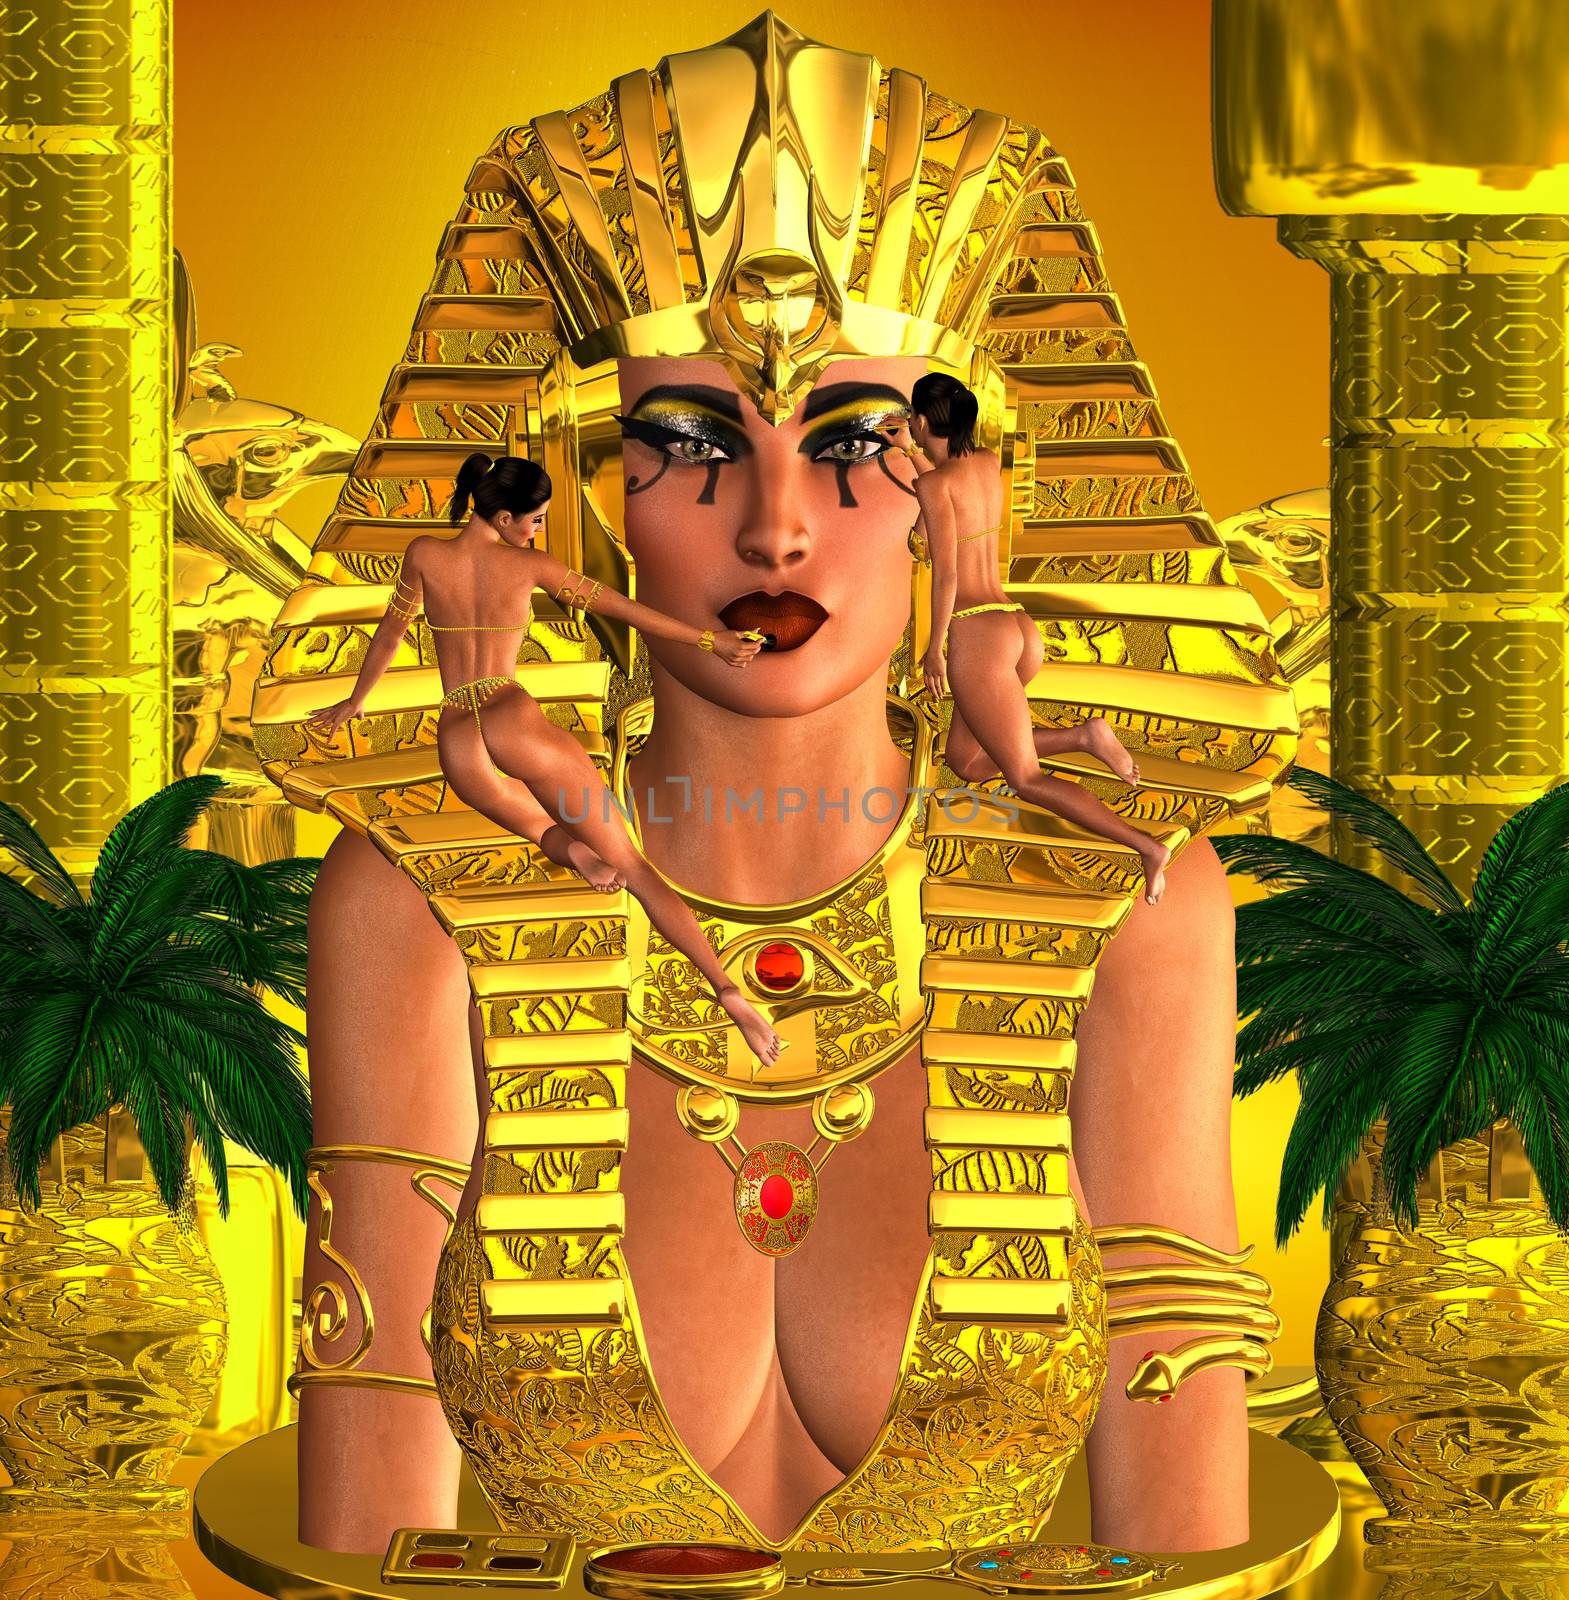 Face Of The Pharaoh Queen. She was a force to be reckoned with, a queen who ruled like a king yet adorned her face with perfection. She aroused a confusing amalgamation of emotions from her subjects.